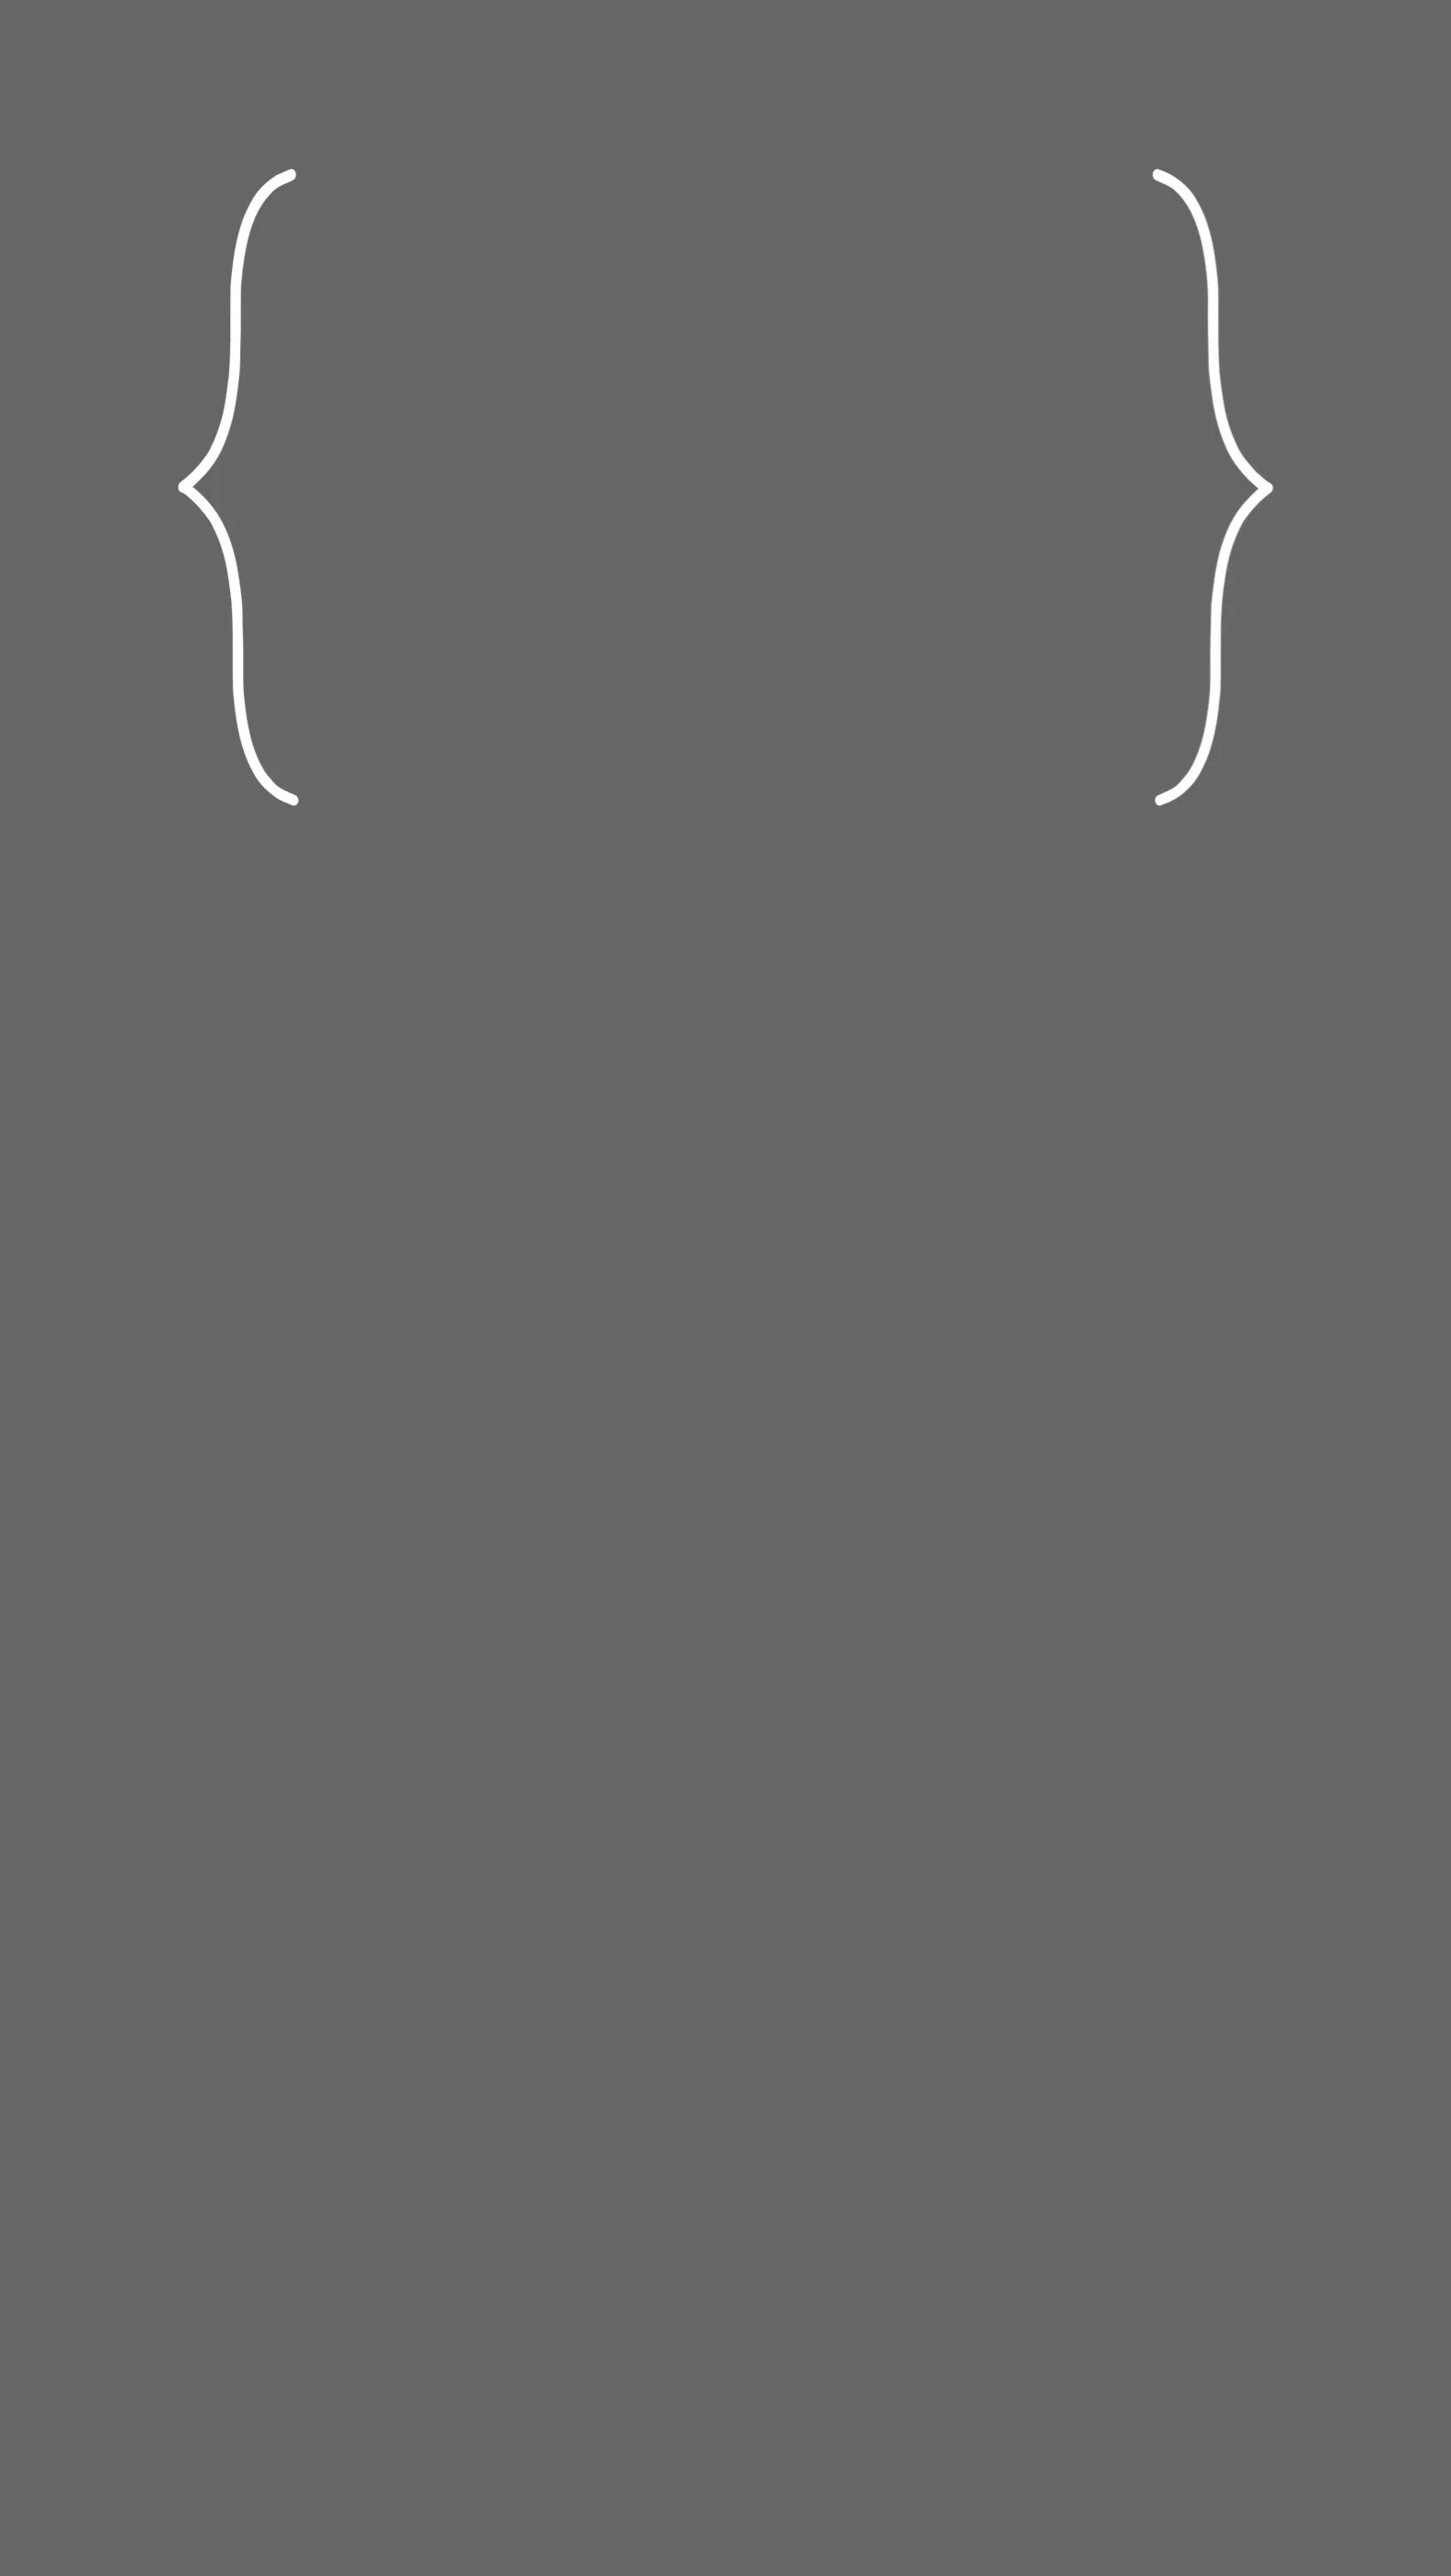 IPhone 6 Plus lock screen wallpaper. Minimal gray with white clock outline